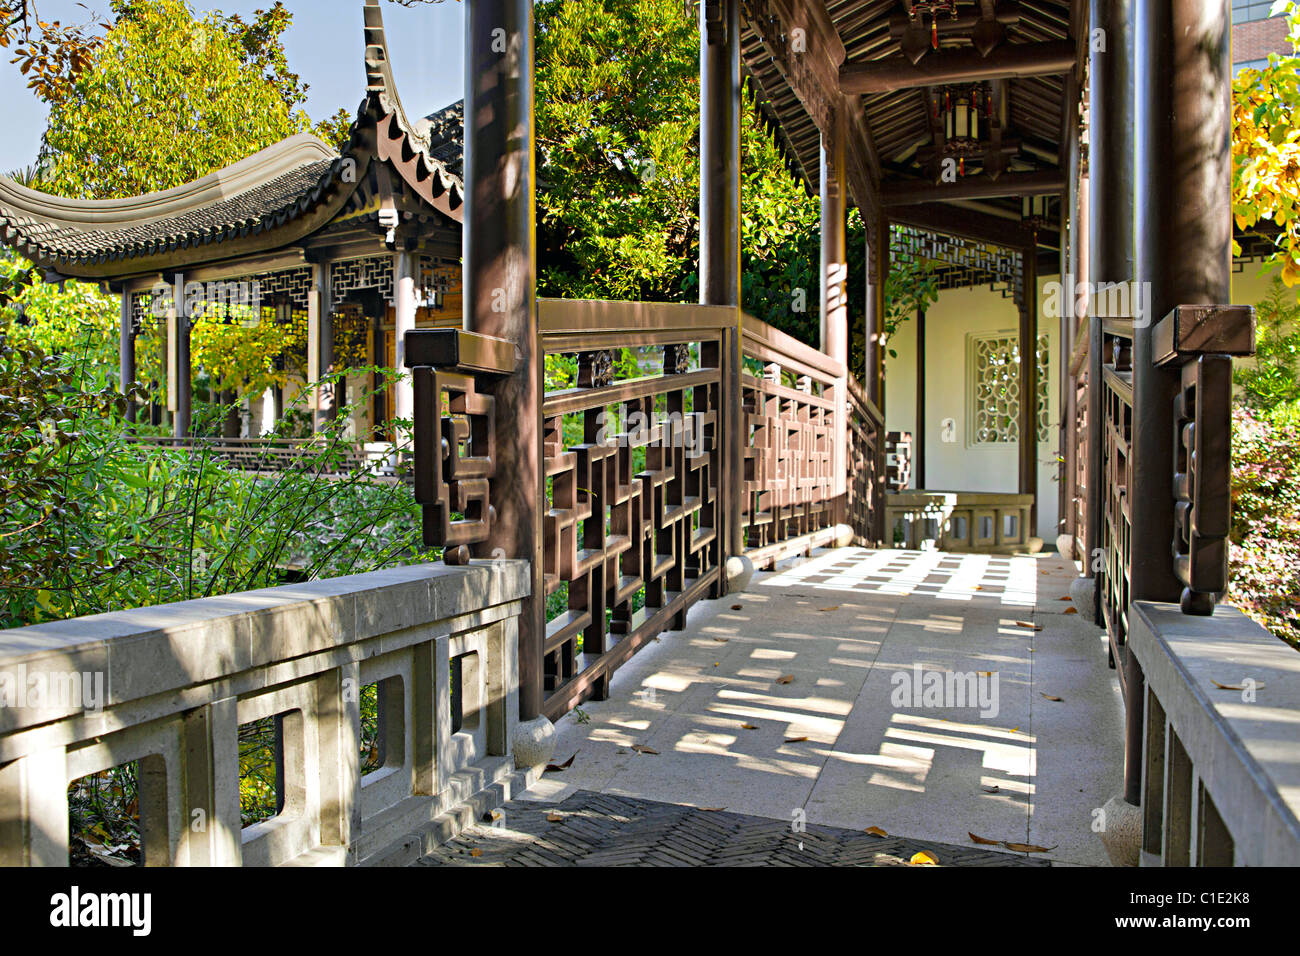 Covered Walkway in Suzhou Architectural Style Chinese Garden Stock Photo